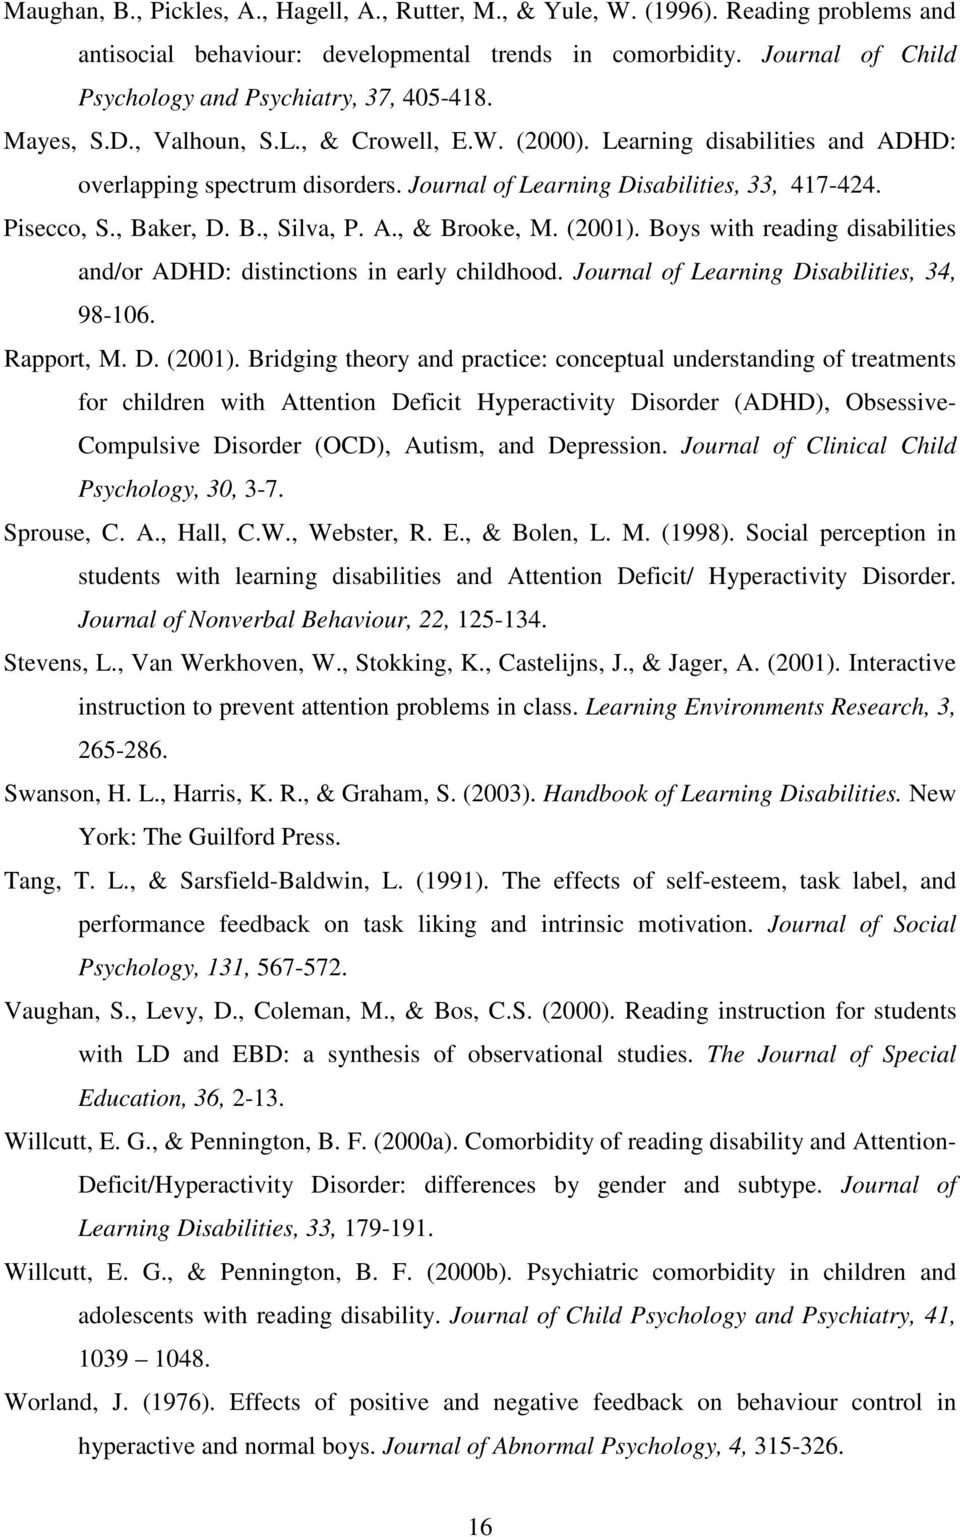 Journal of Learning Disabilities, 33, 417-424. Pisecco, S., Baker, D. B., Silva, P. A., & Brooke, M. (2001). Boys with reading disabilities and/or ADHD: distinctions in early childhood.